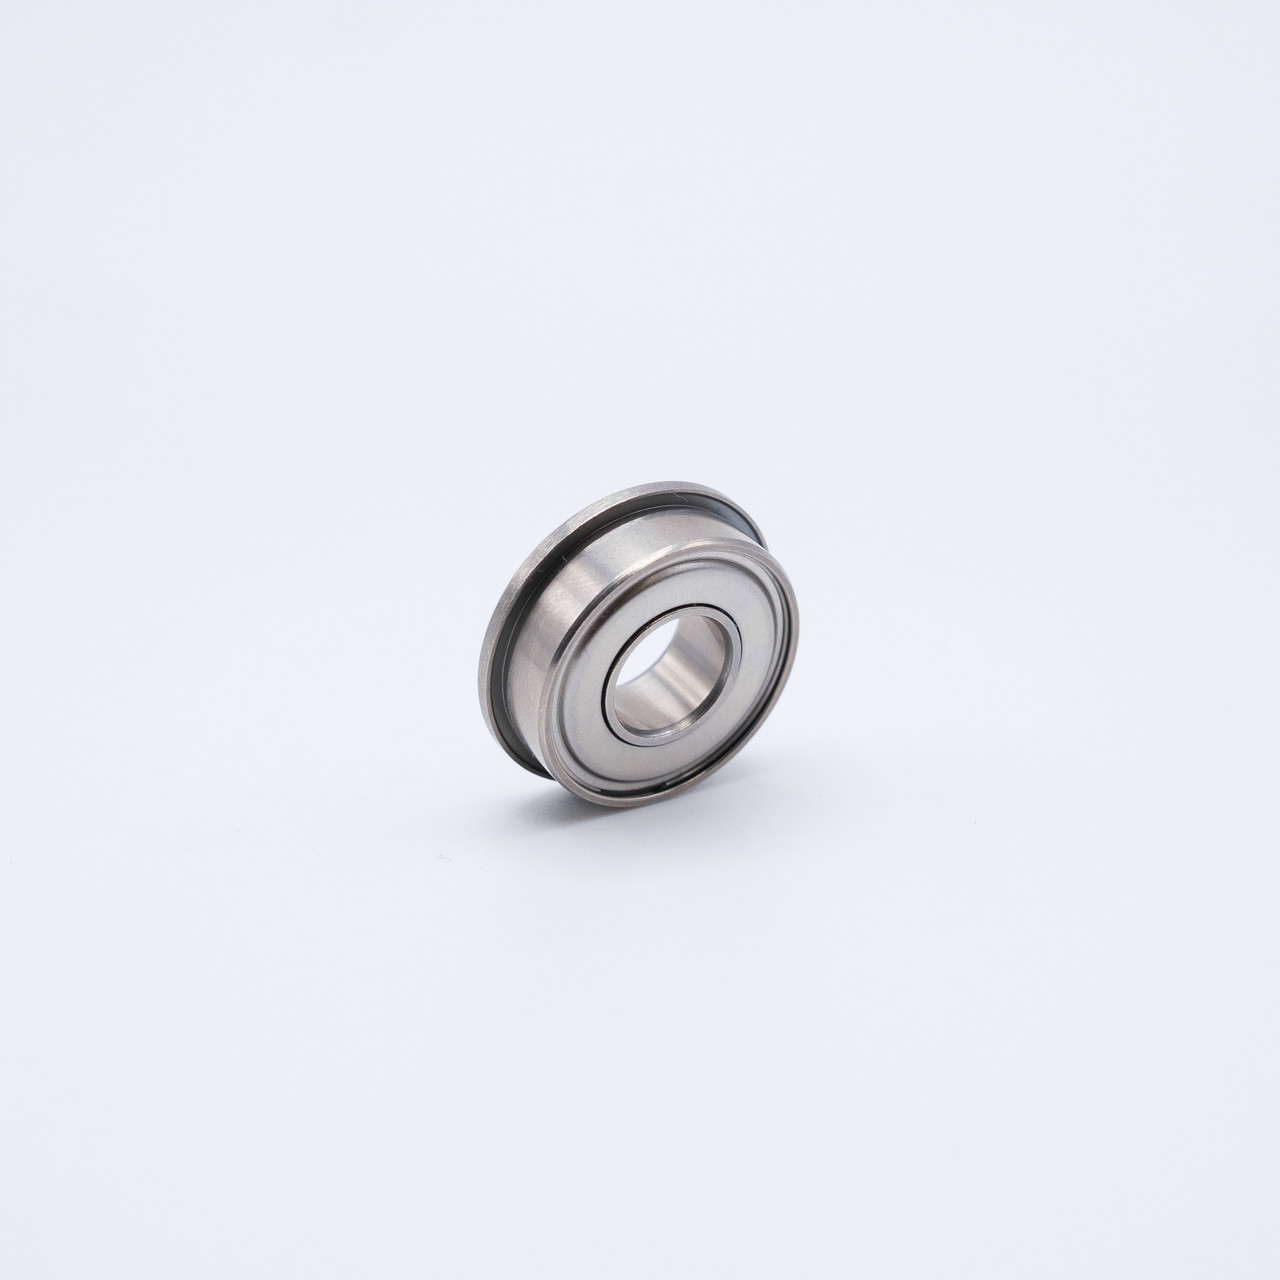 SFR8-ZZ Stainless Steel Flanged Miniature Ball Bearing 1/2x1-1/8x5/16 Side View